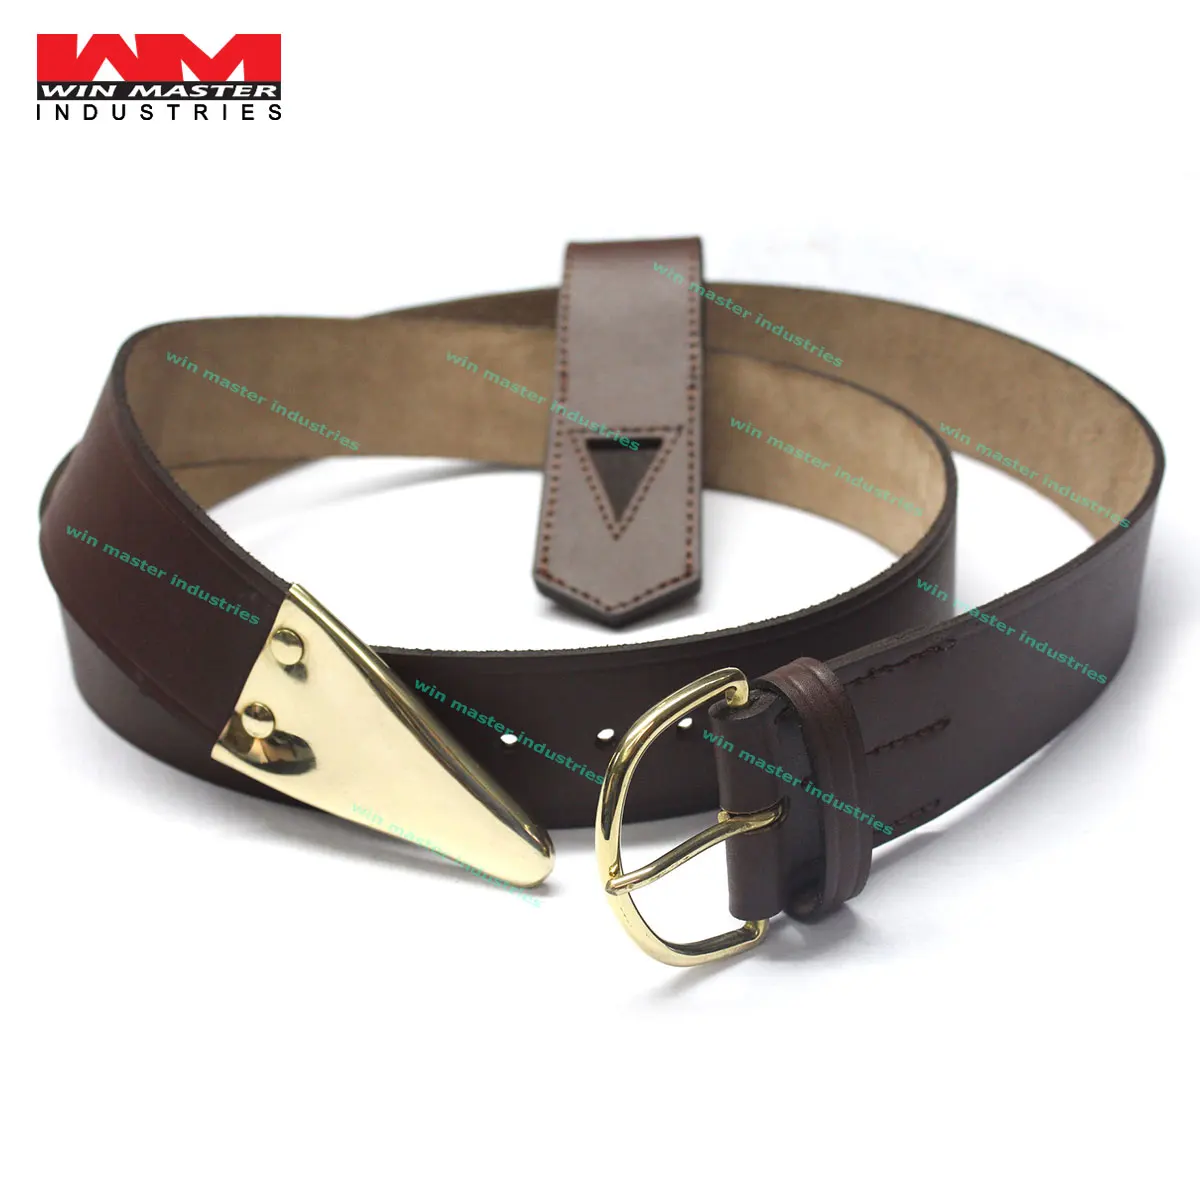 Masonic Reversible Belt with two Buckles